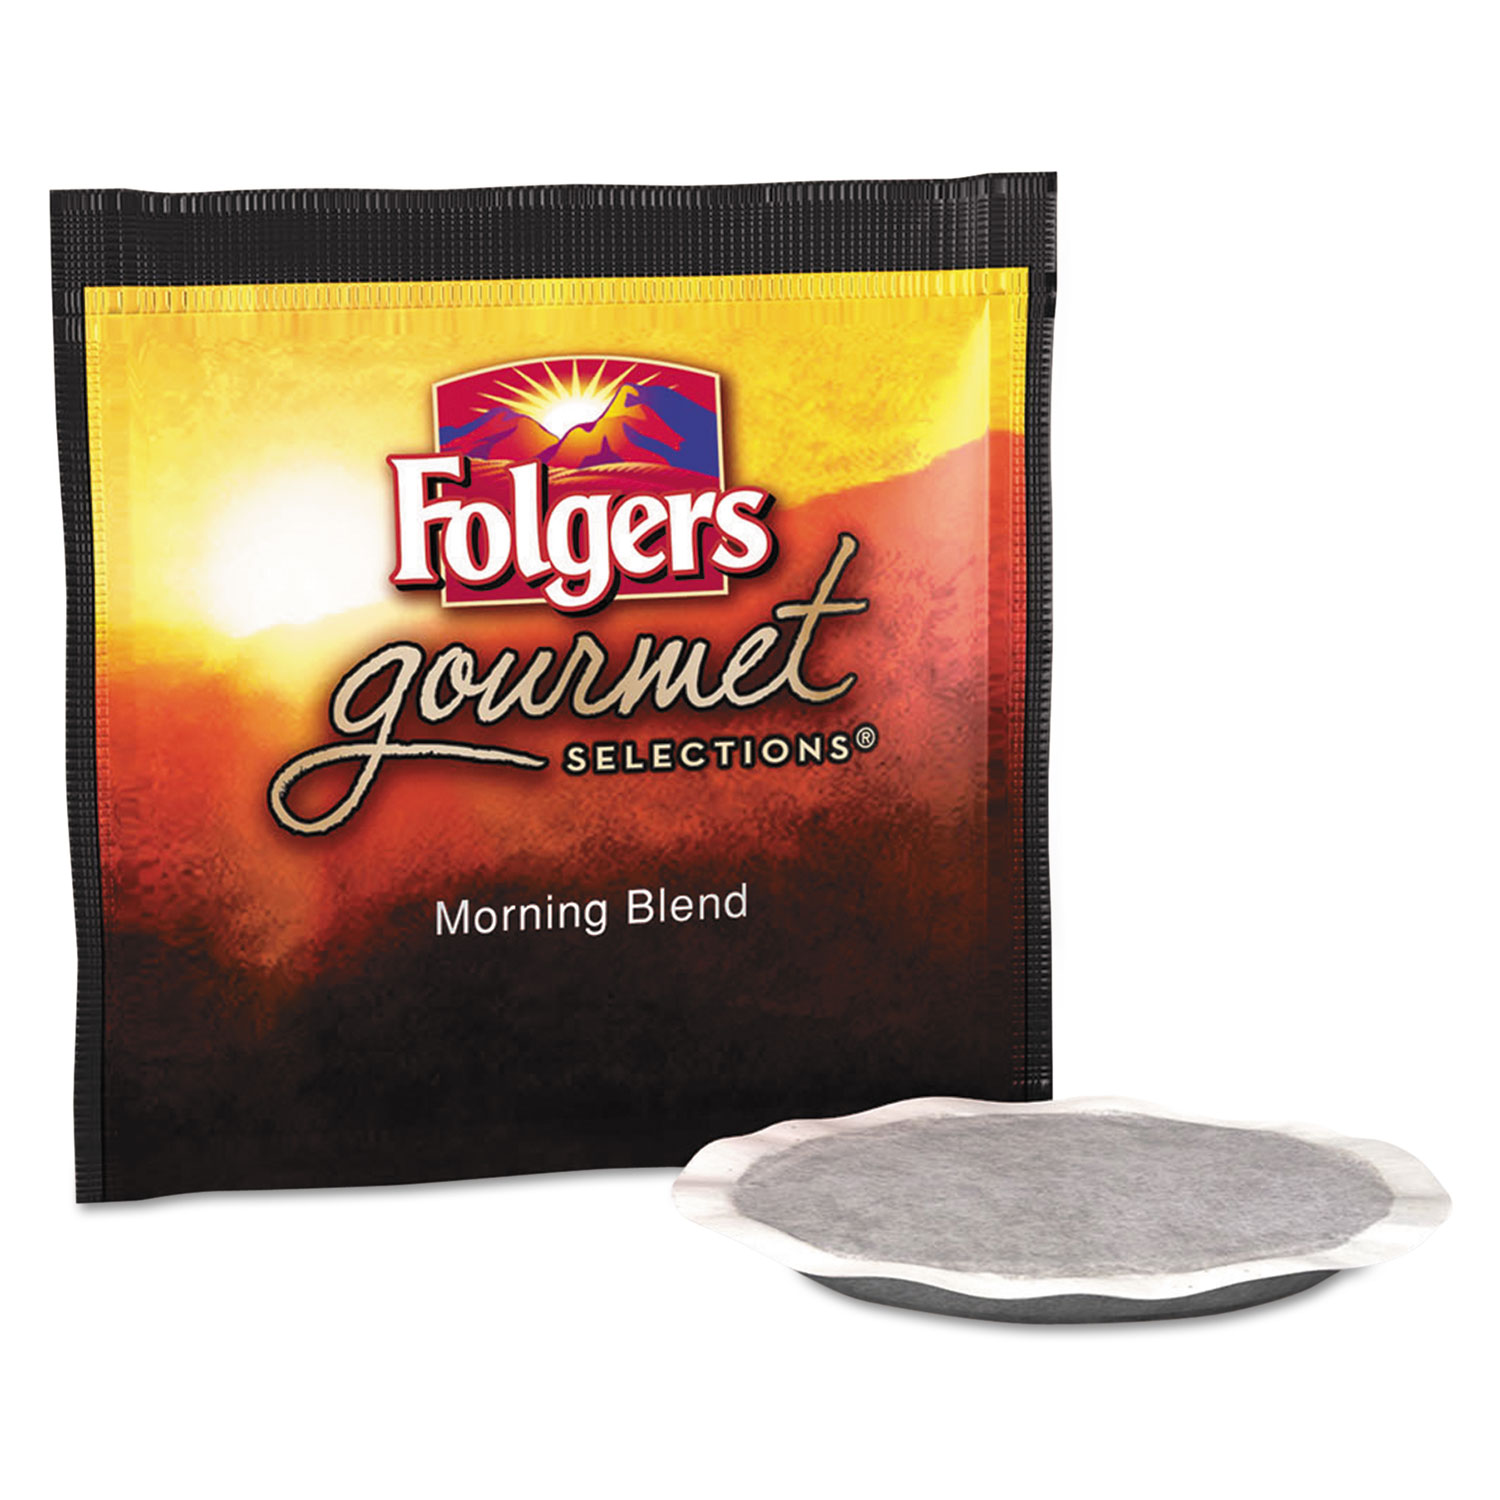  Folgers 2550063104 Gourmet Selections Coffee Pods, Morning Blend, 18/Box (FOL63104) 